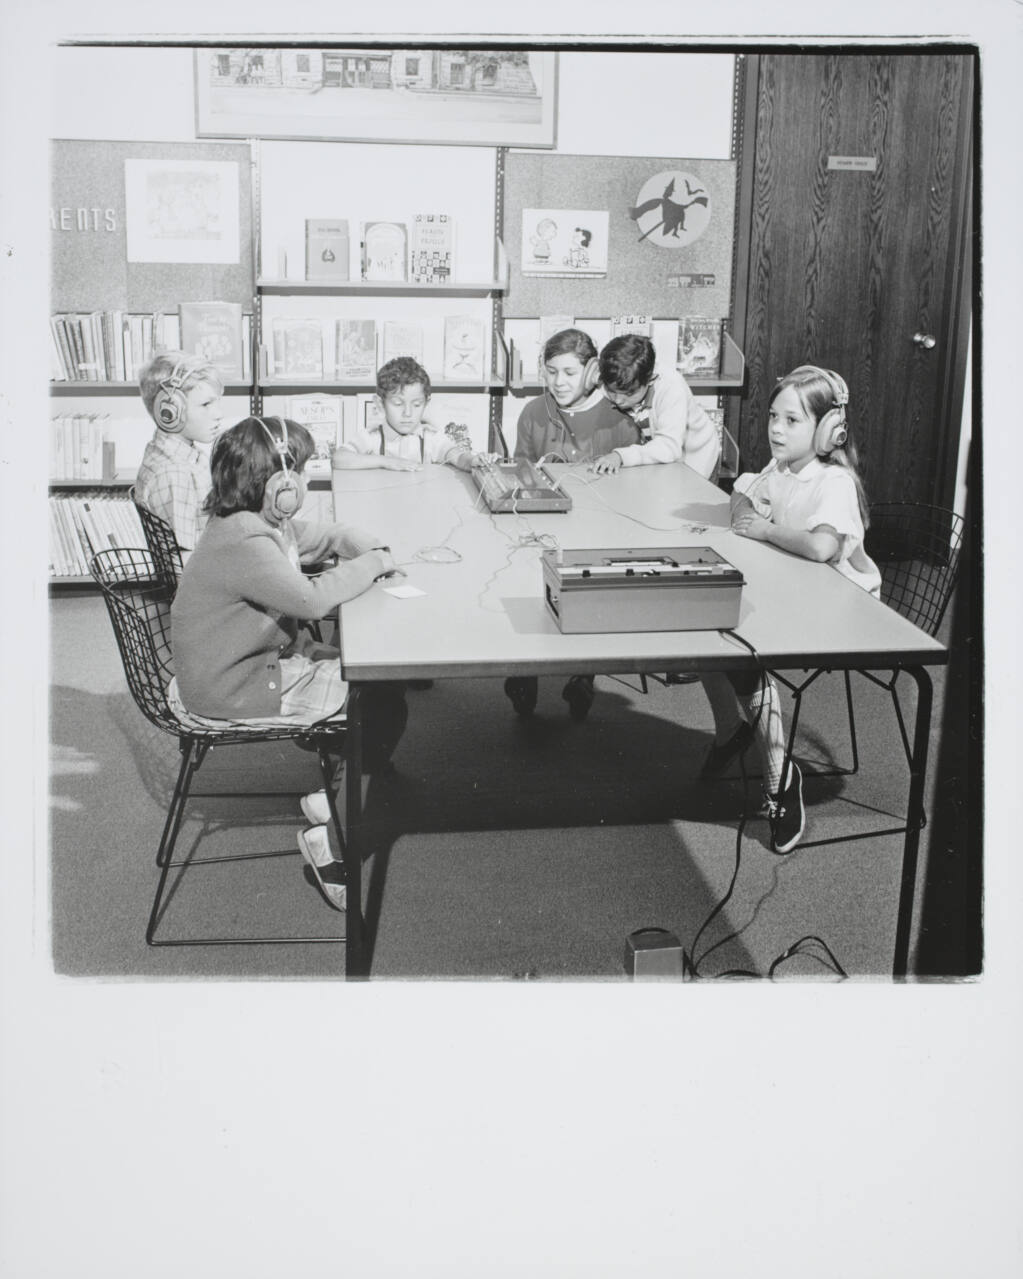 Children listen to cassettes in the children's section of the library in Santa Rosa, 1970. (Sonoma County Library)